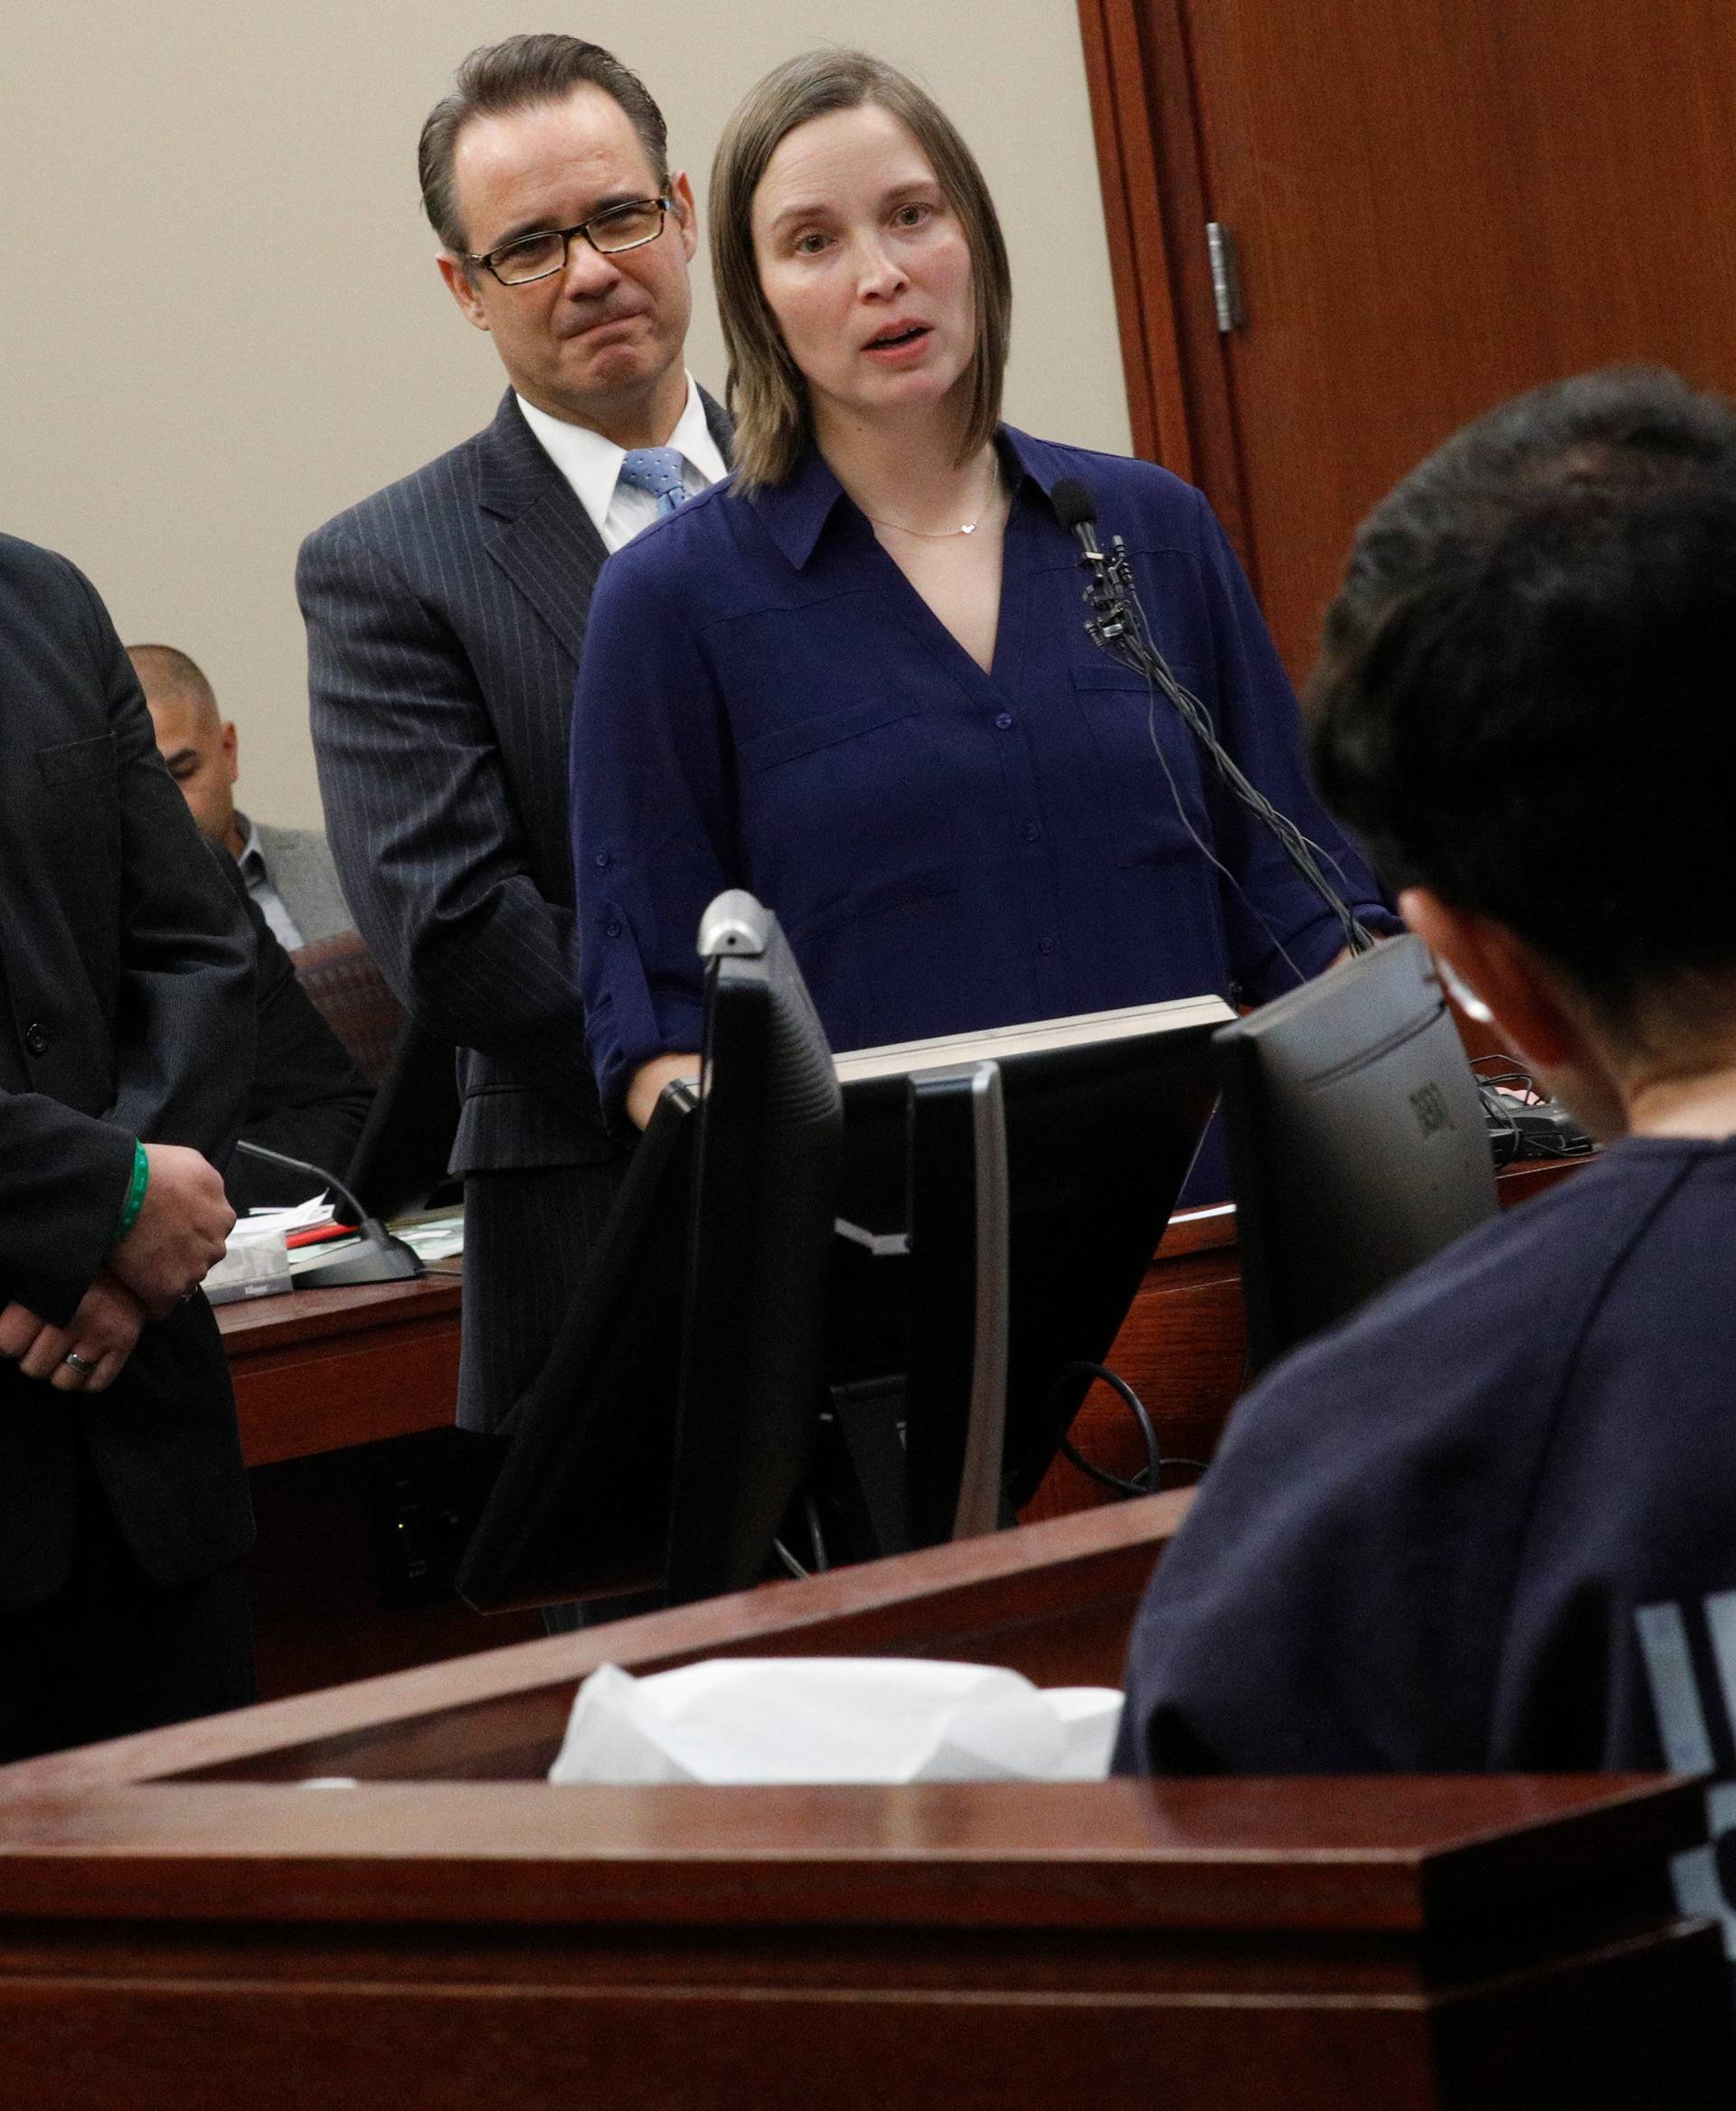 Victim Christina Barba speaks at the sentencing hearing for Larry Nassar, a former team USA Gymnastics doctor who pleaded guilty in November 2017 to sexual assault charges, in Lansing, Michigan